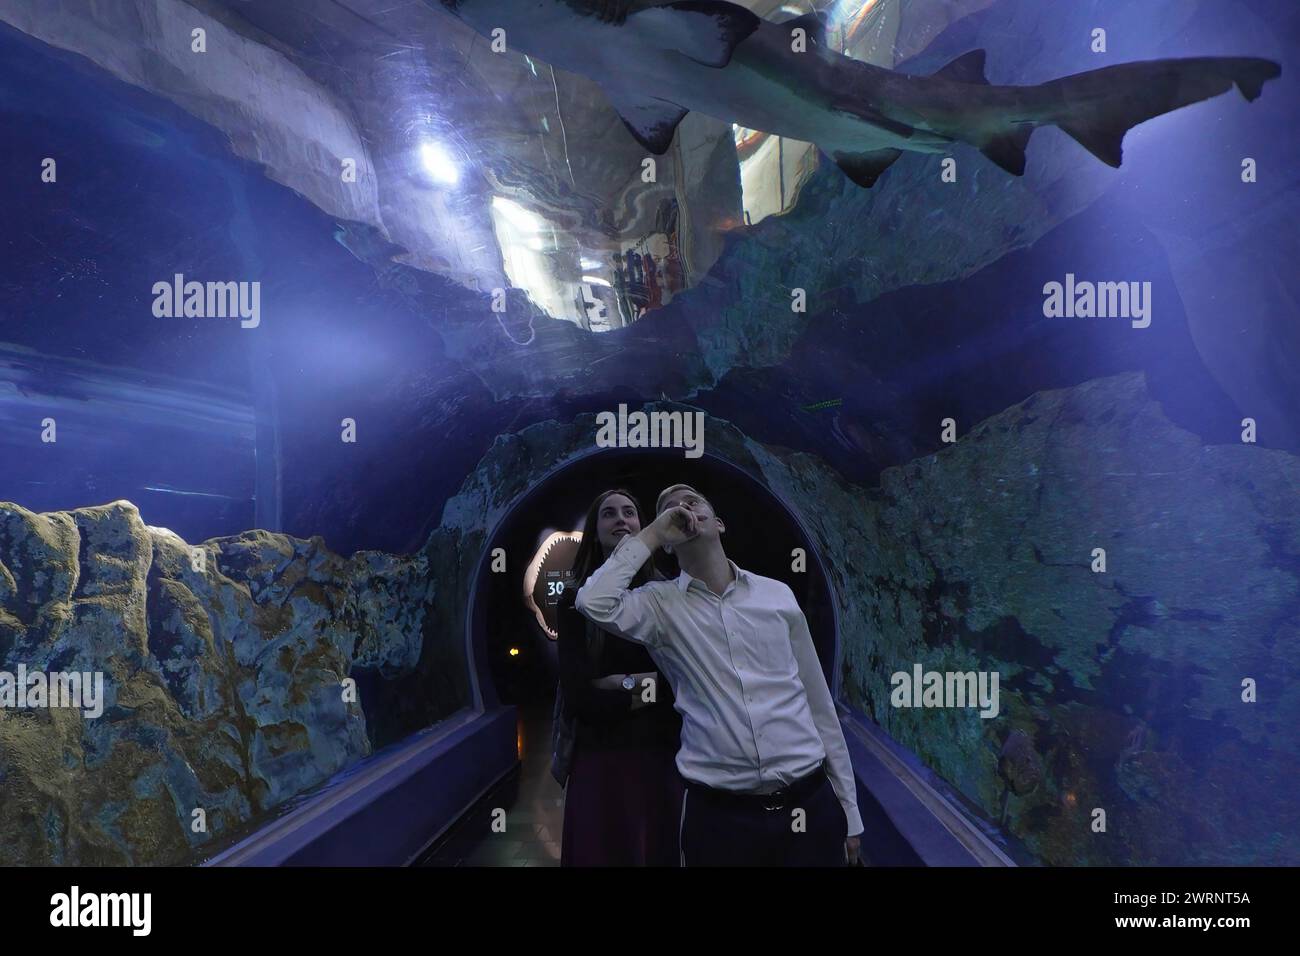 A Haredi Jewish couple walk through a glass-covered walkway as they watch a shark swimming at the Gottesman Family Israel Aquarium, dedicated to the conservation of Israel's aquatic habitats, in Jerusalem. Israel Stock Photo